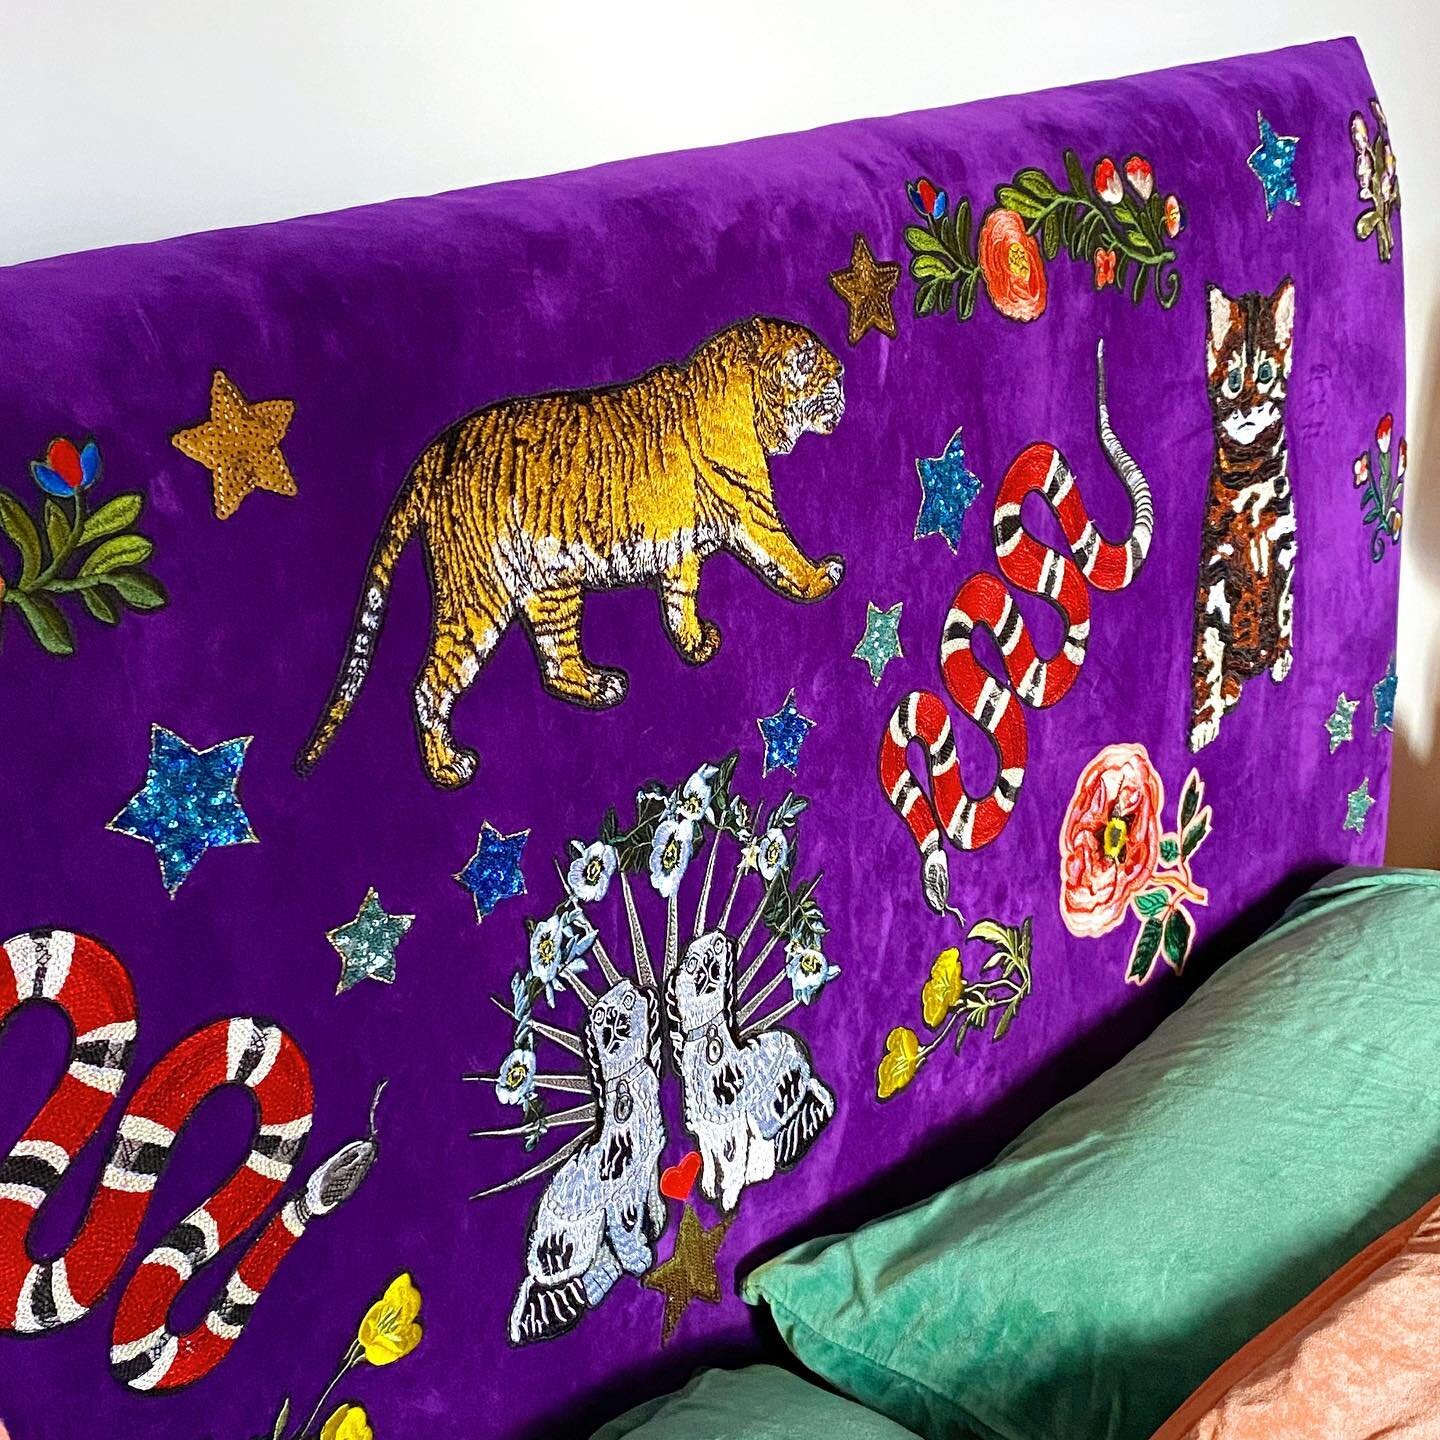 My headboard makeover... I made the original headboard a few years ago, but it was time to update! 🐍 🐅 🌸 🐱 ⭐️